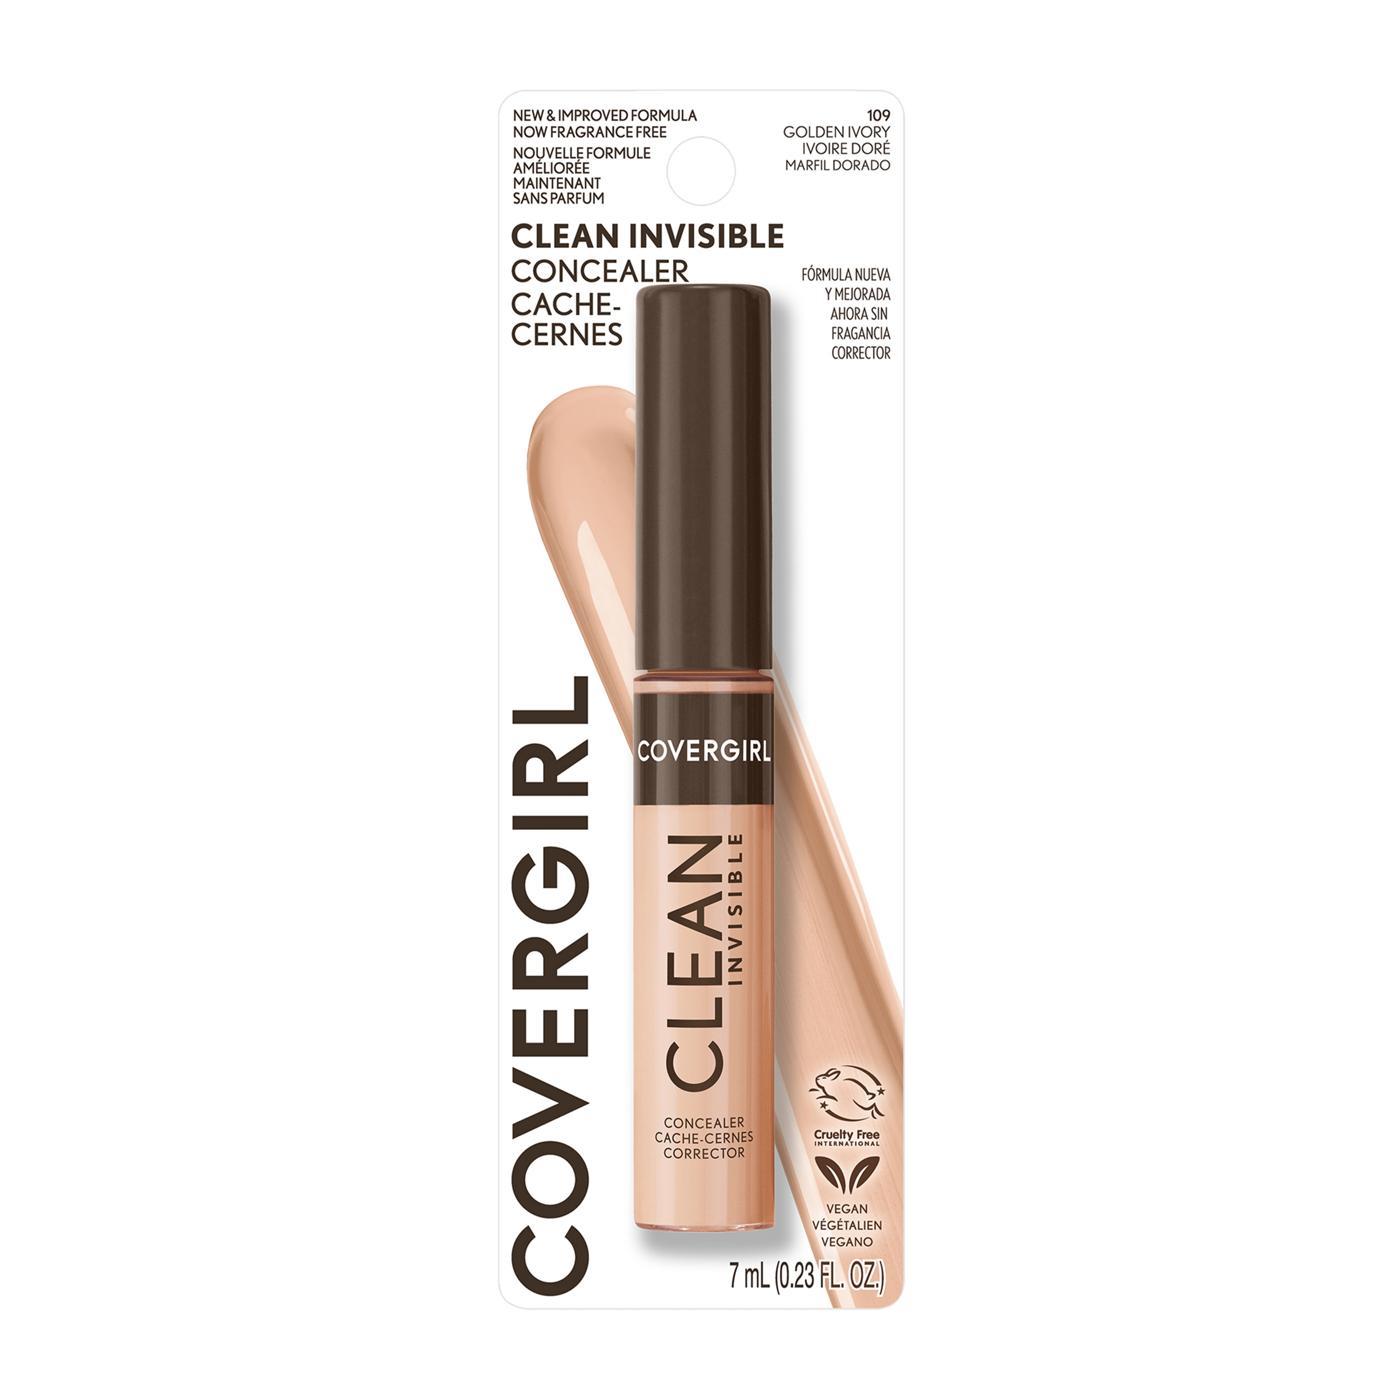 Covergirl Clean Invisible Concealer - Golden Ivory; image 1 of 14